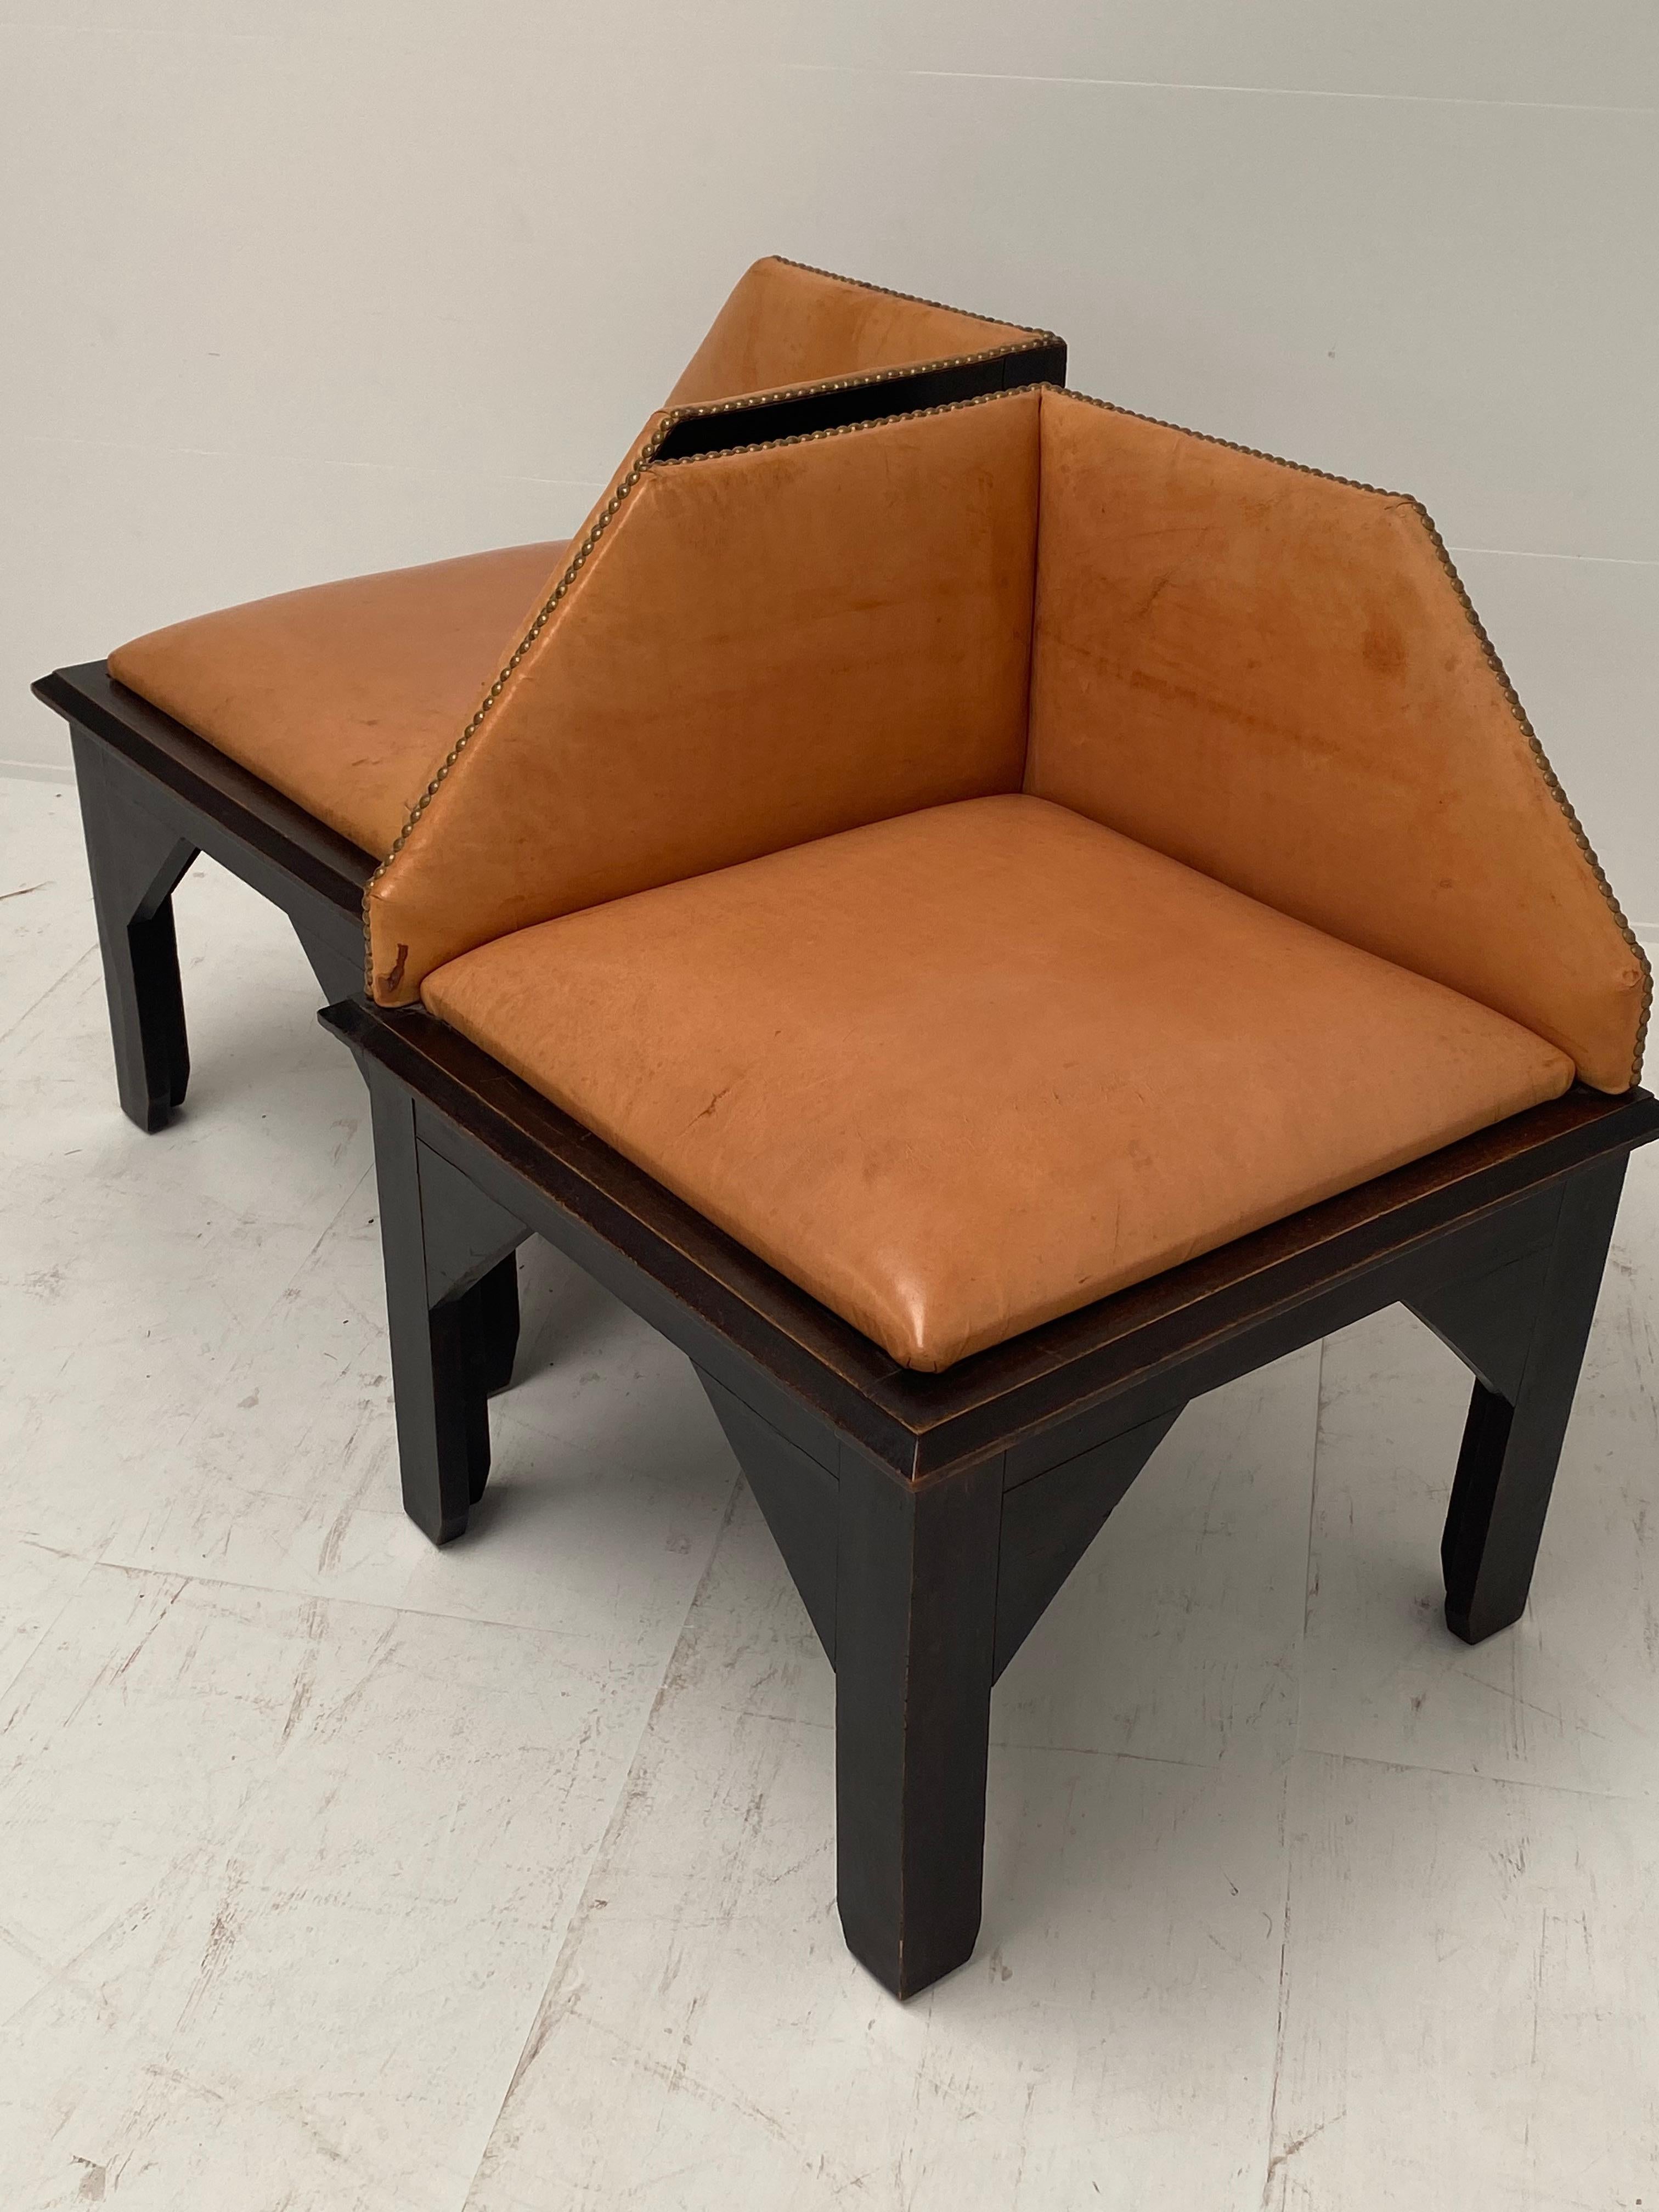 Pair of Art Deco Style Leather Corner Chairs, Spain 3